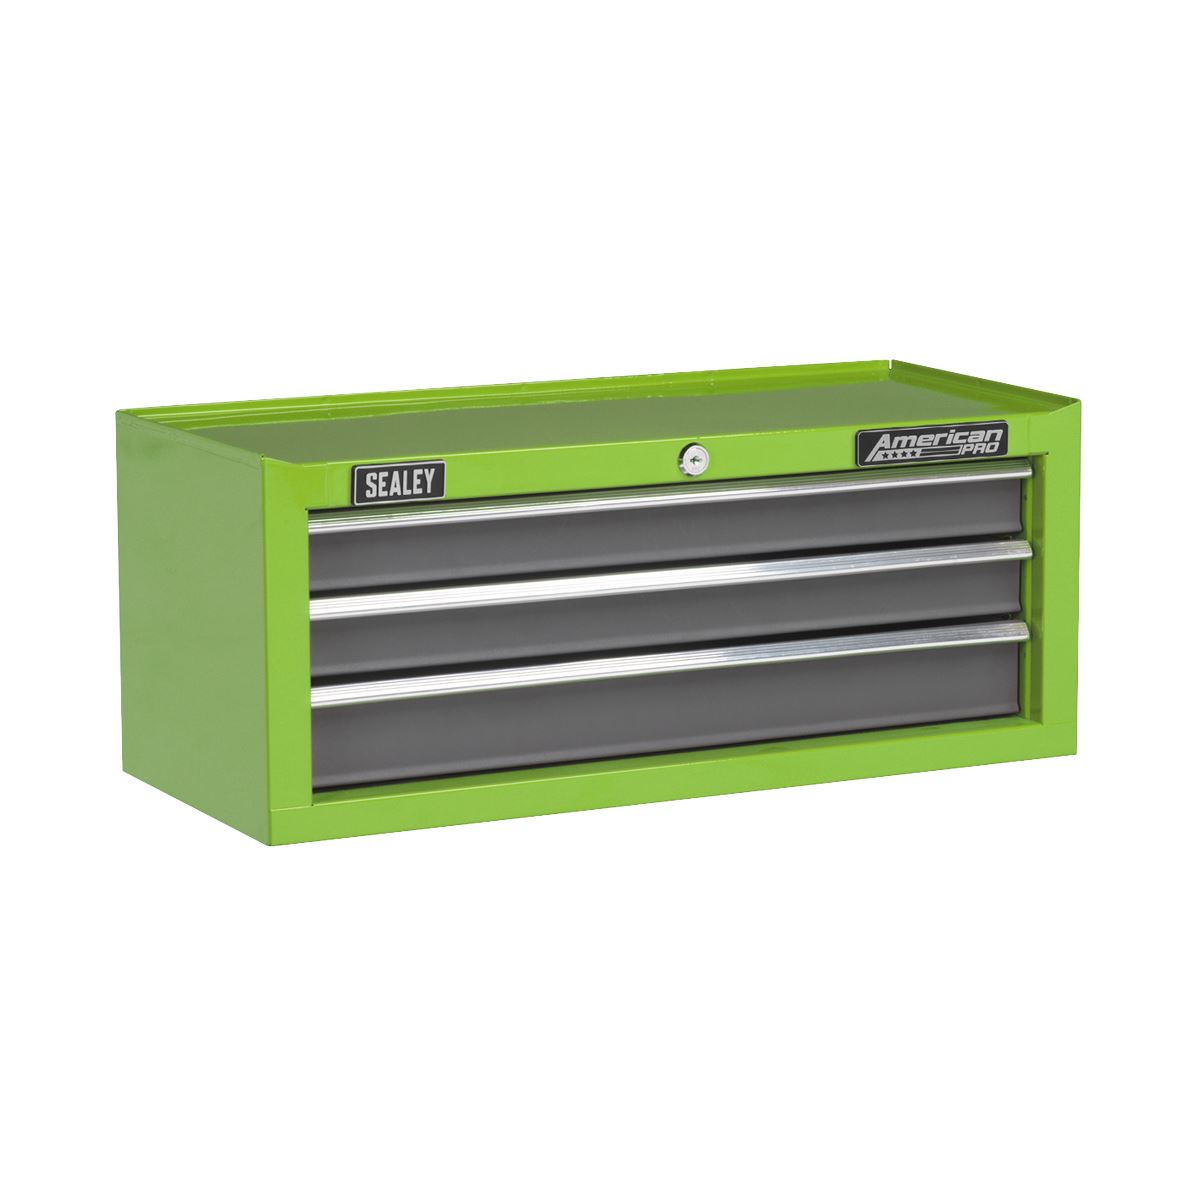 Sealey American Pro Mid-Box 3 Drawer with Ball-Bearing Slides - Green/Grey